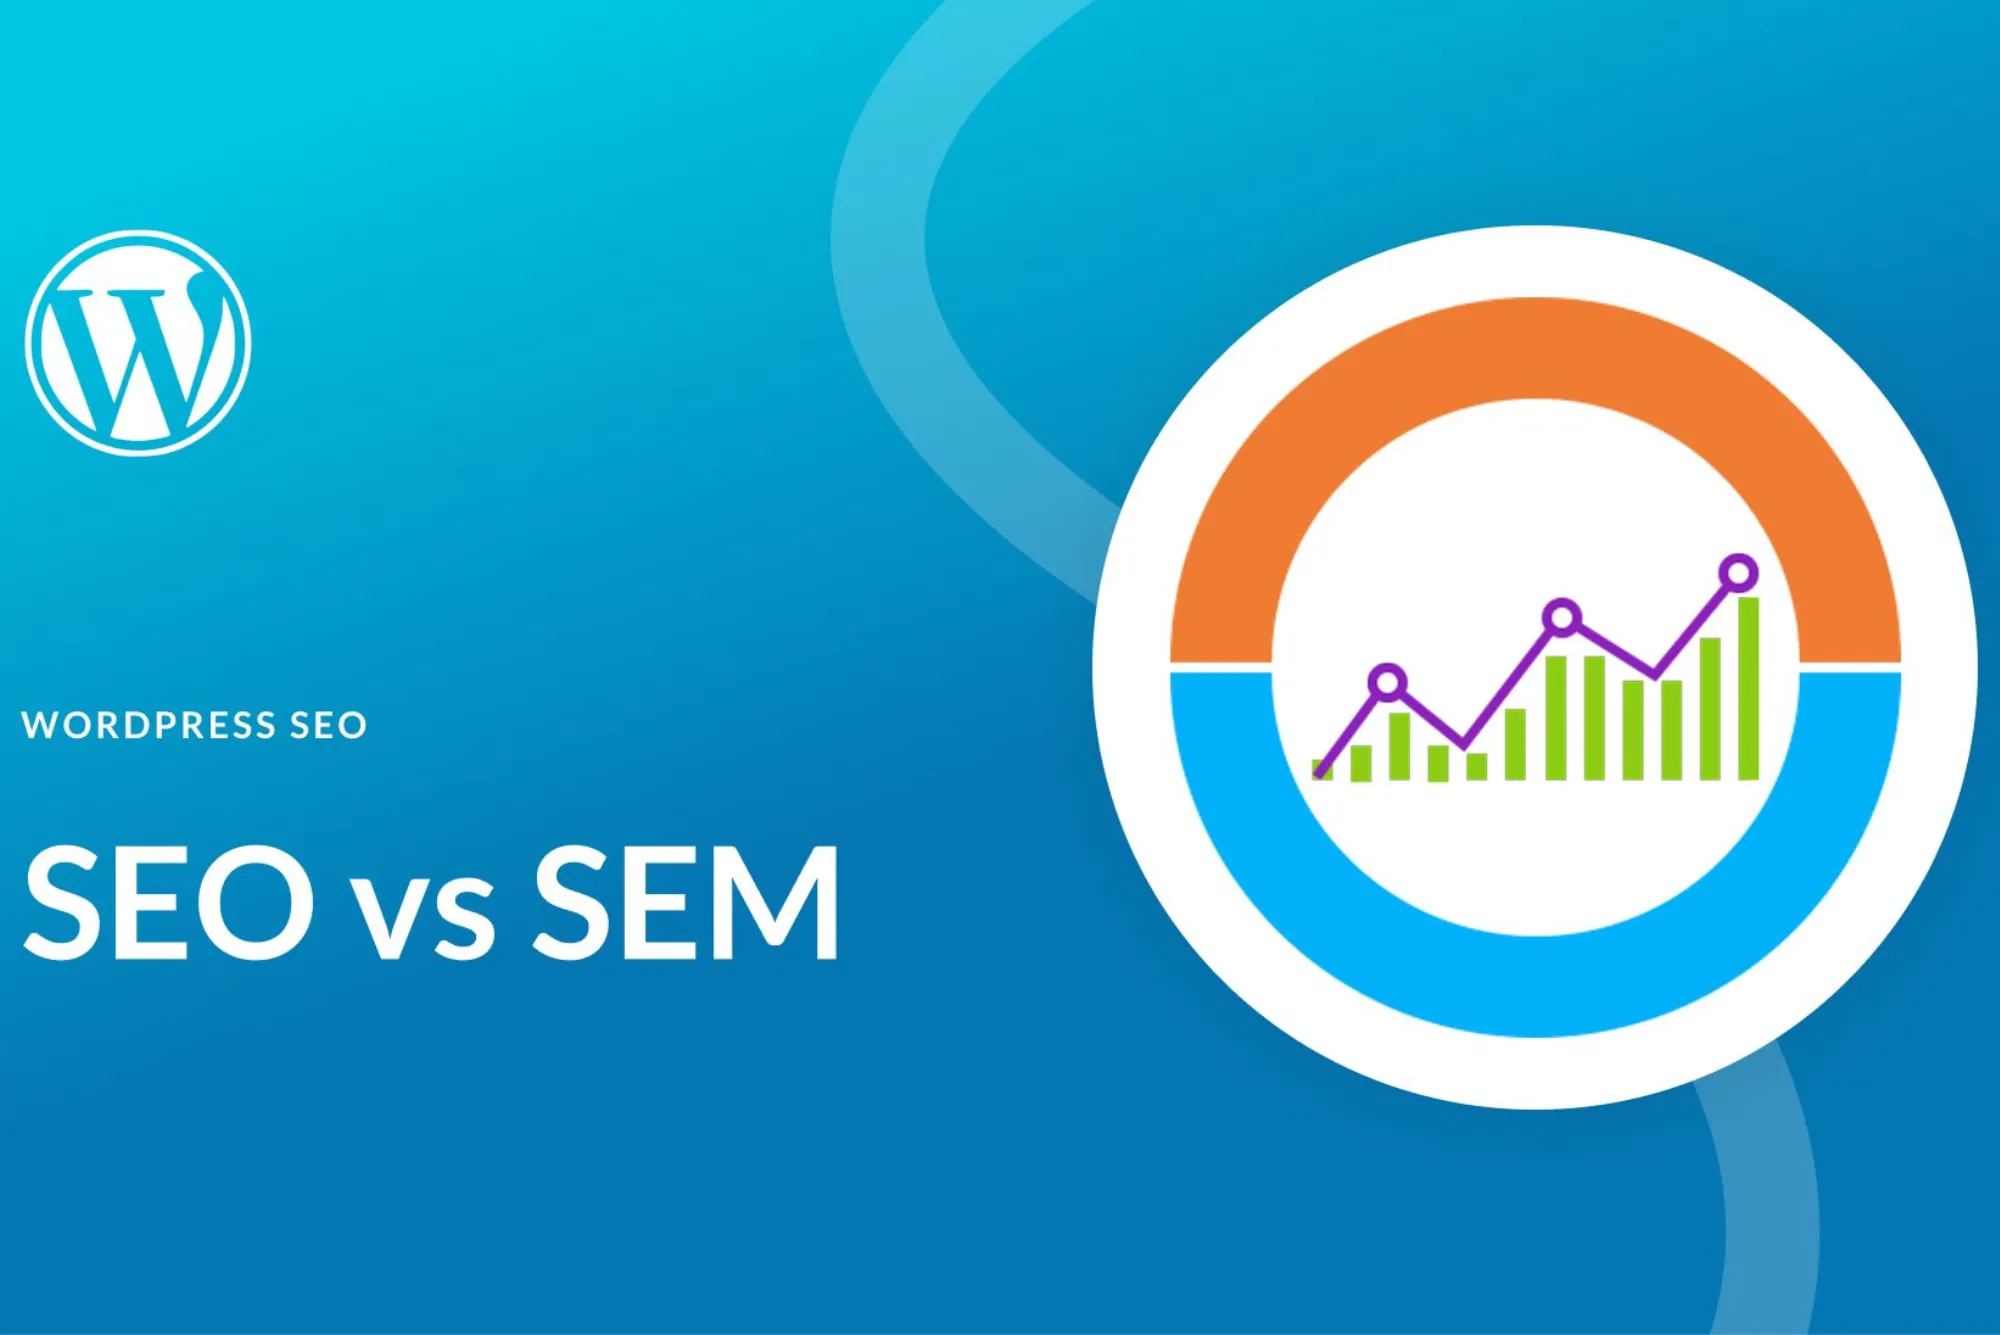 What is SEO and SEM